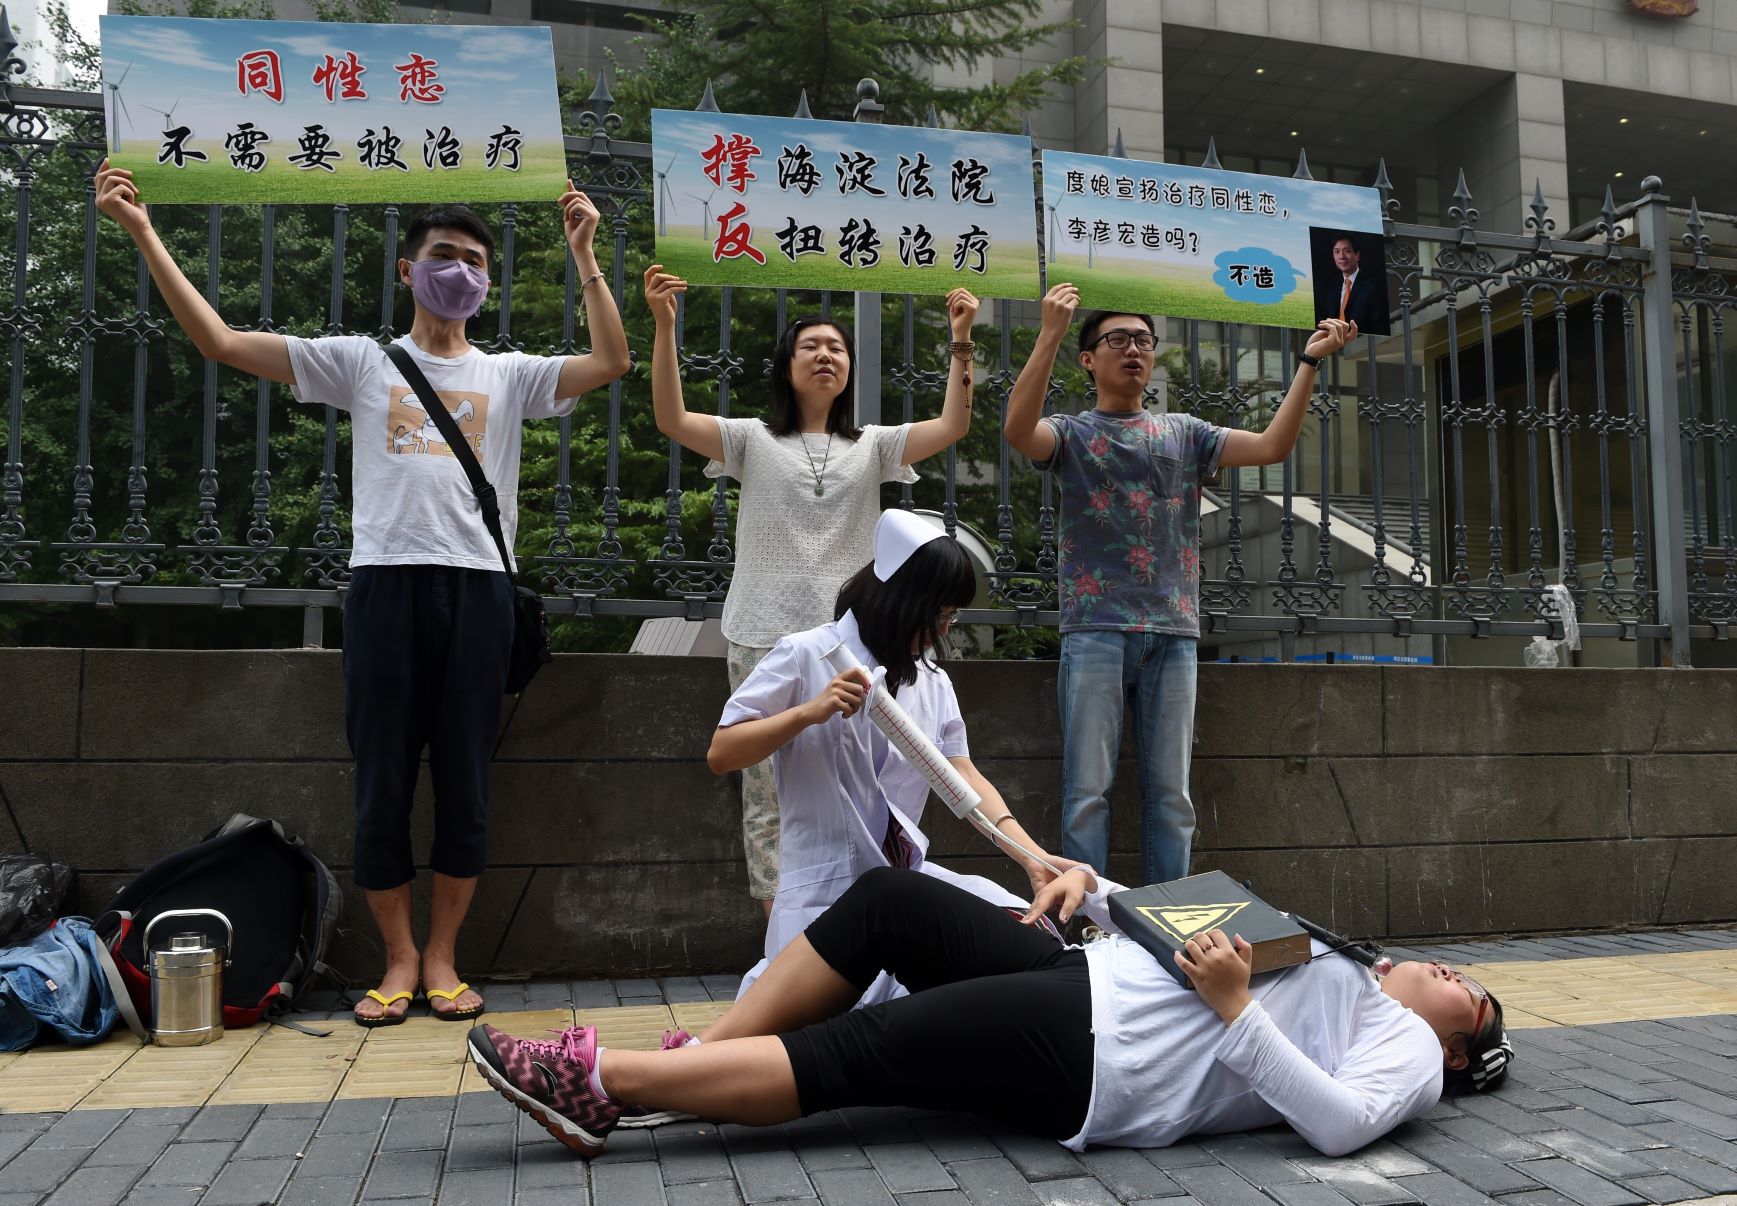 Xiao Tie, executive director of the Beijing LGBT Centre, pretends to inject a patient with a mock syringe during a protest outside the Haidian District Court in Beijing on July 31, 2014. The court began hearing a landmark case on 